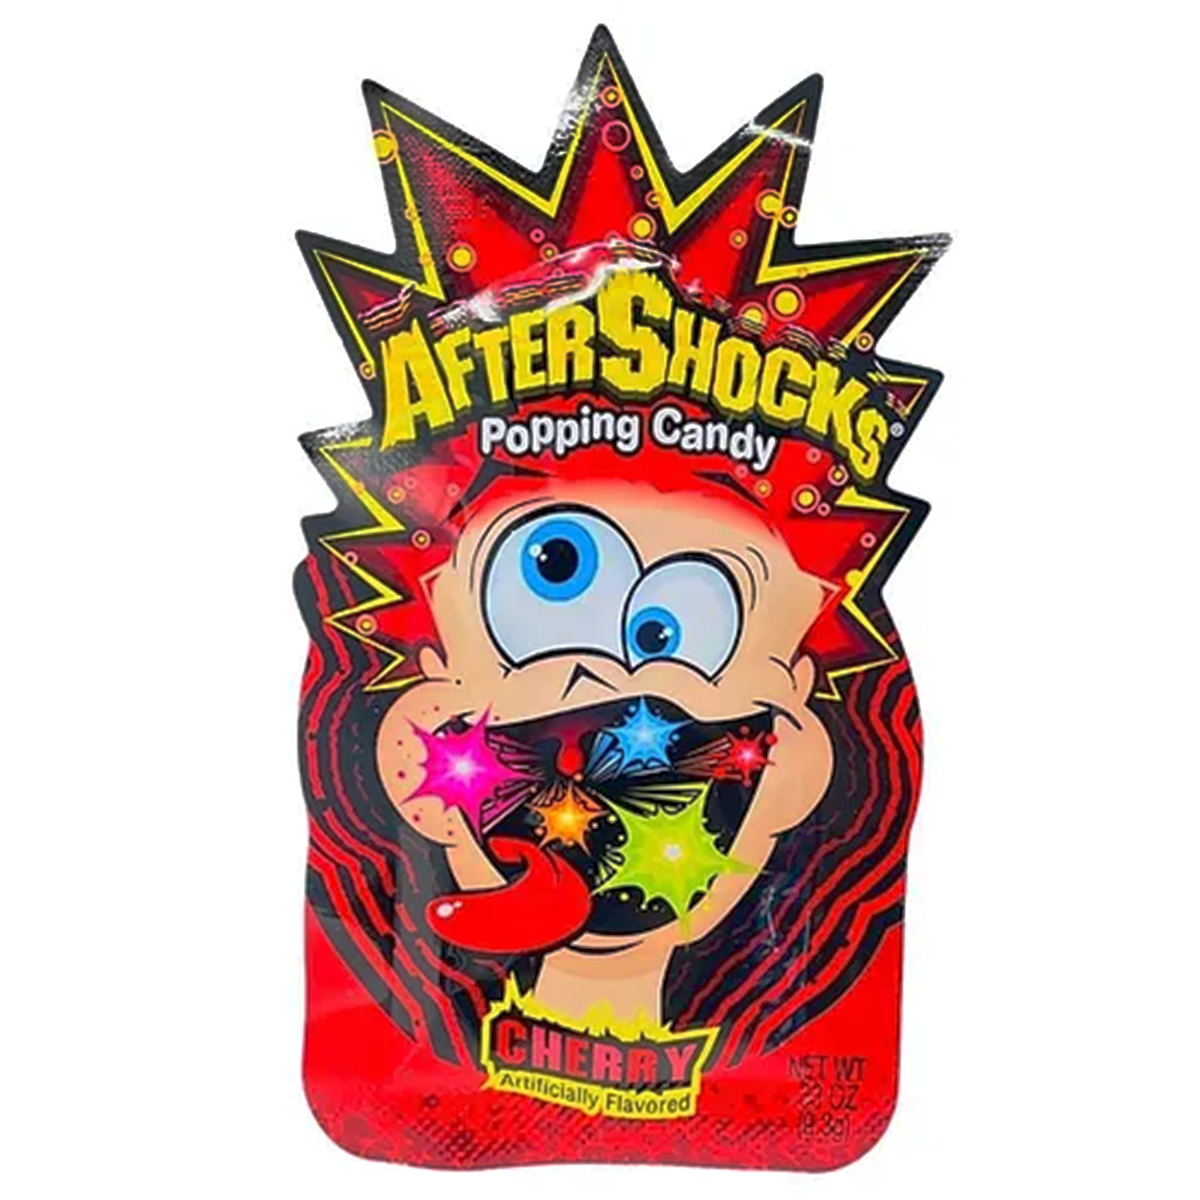 AfterShocks Popping Candy - Cherry